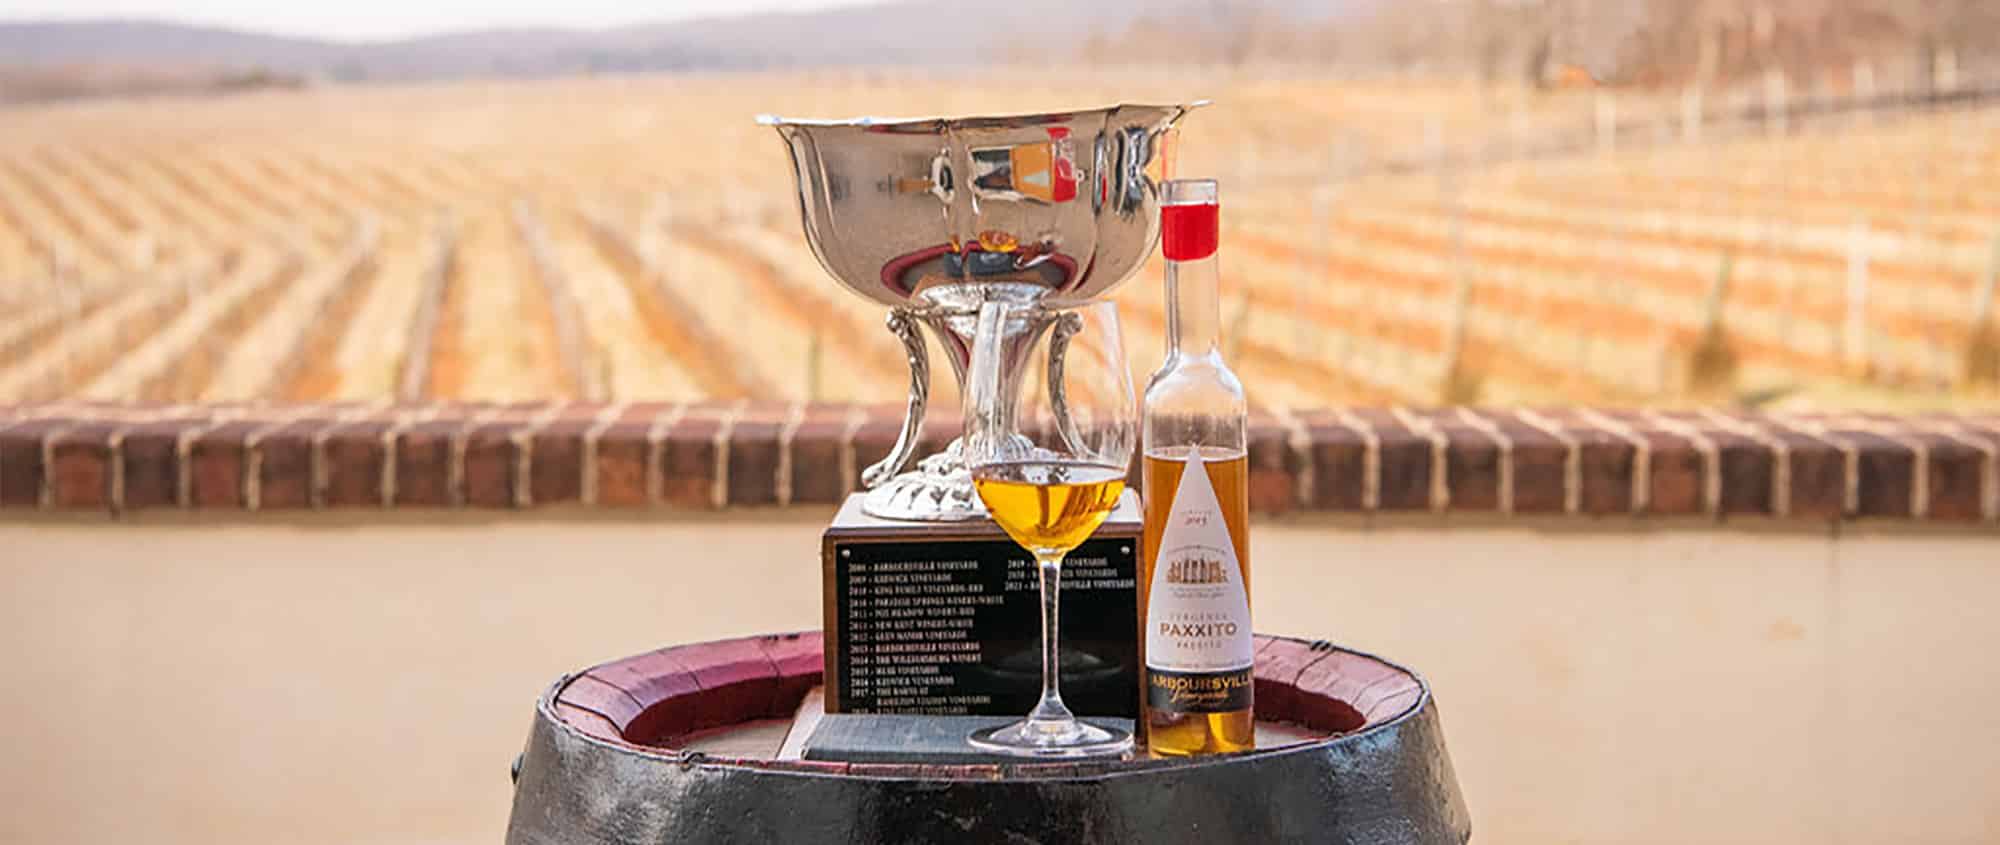 Barboursville Vineyards Paxxito wine with Virginia Governors Cup trophy